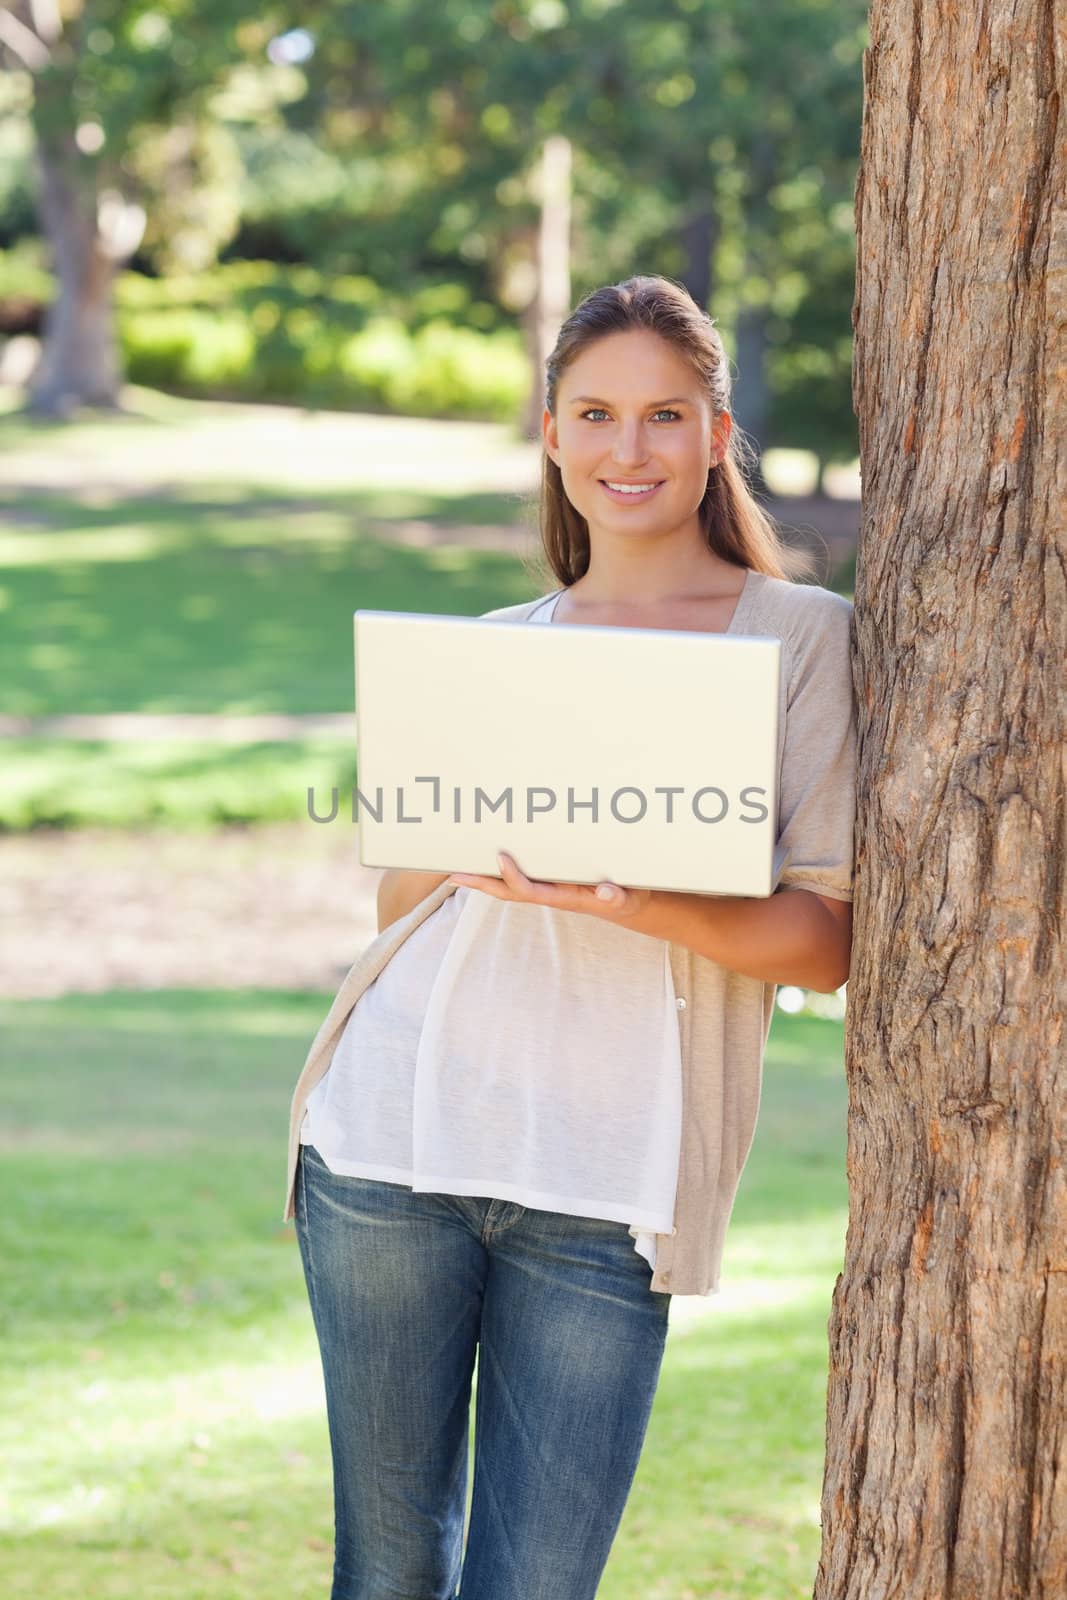 Smiling young woman using a laptop while leaning against a tree